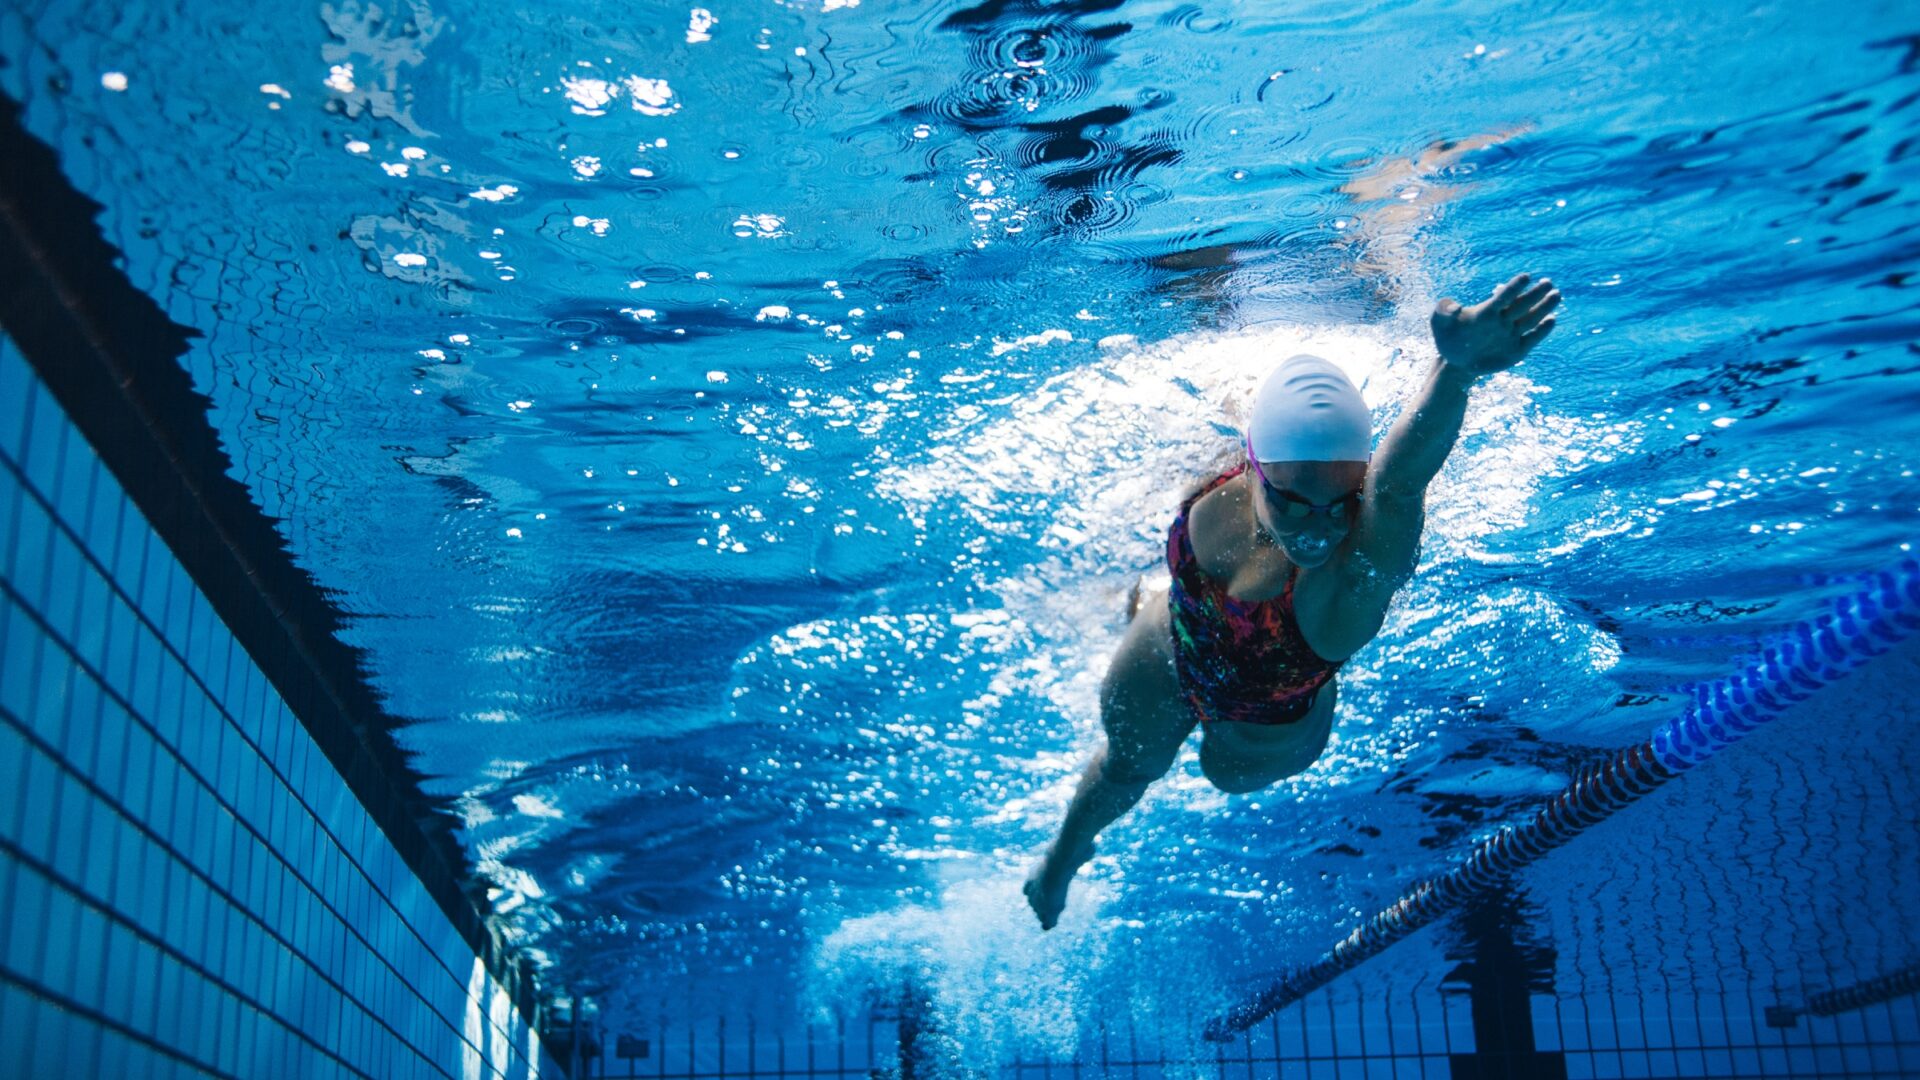 Underwater shot of a woman swimming laps